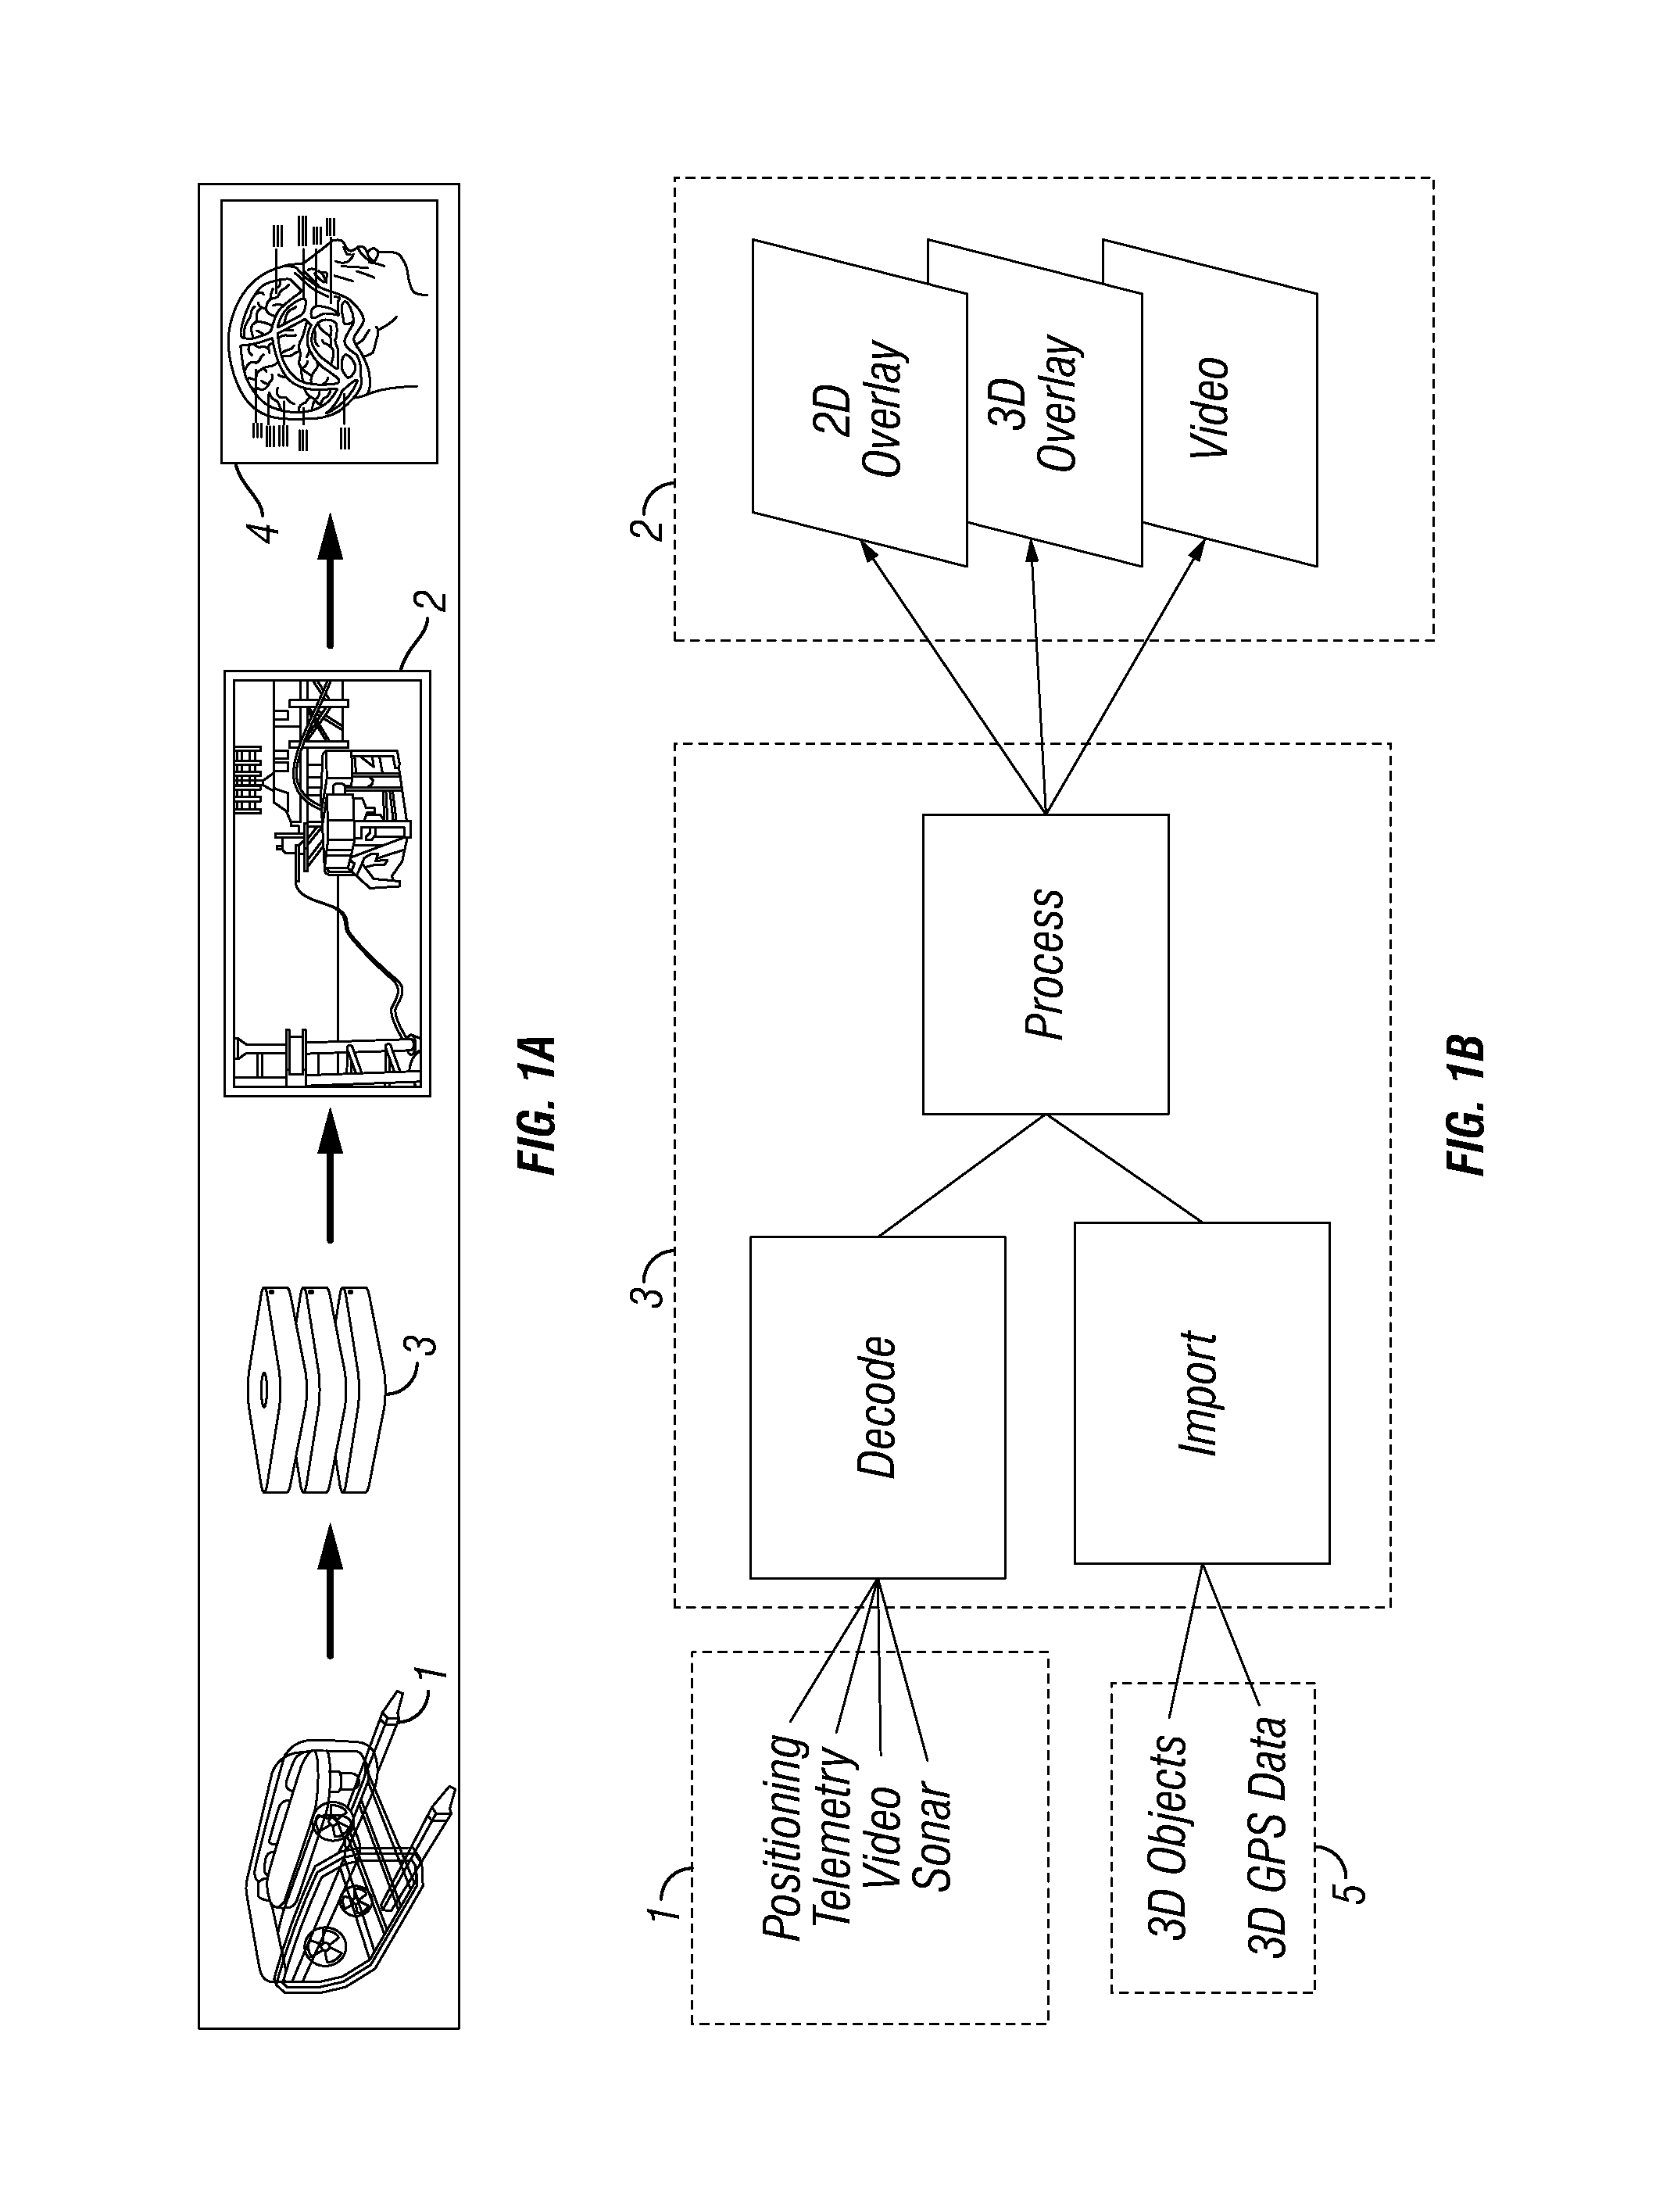 System and method of operation for remotely operated vehicles with superimposed 3D imagery